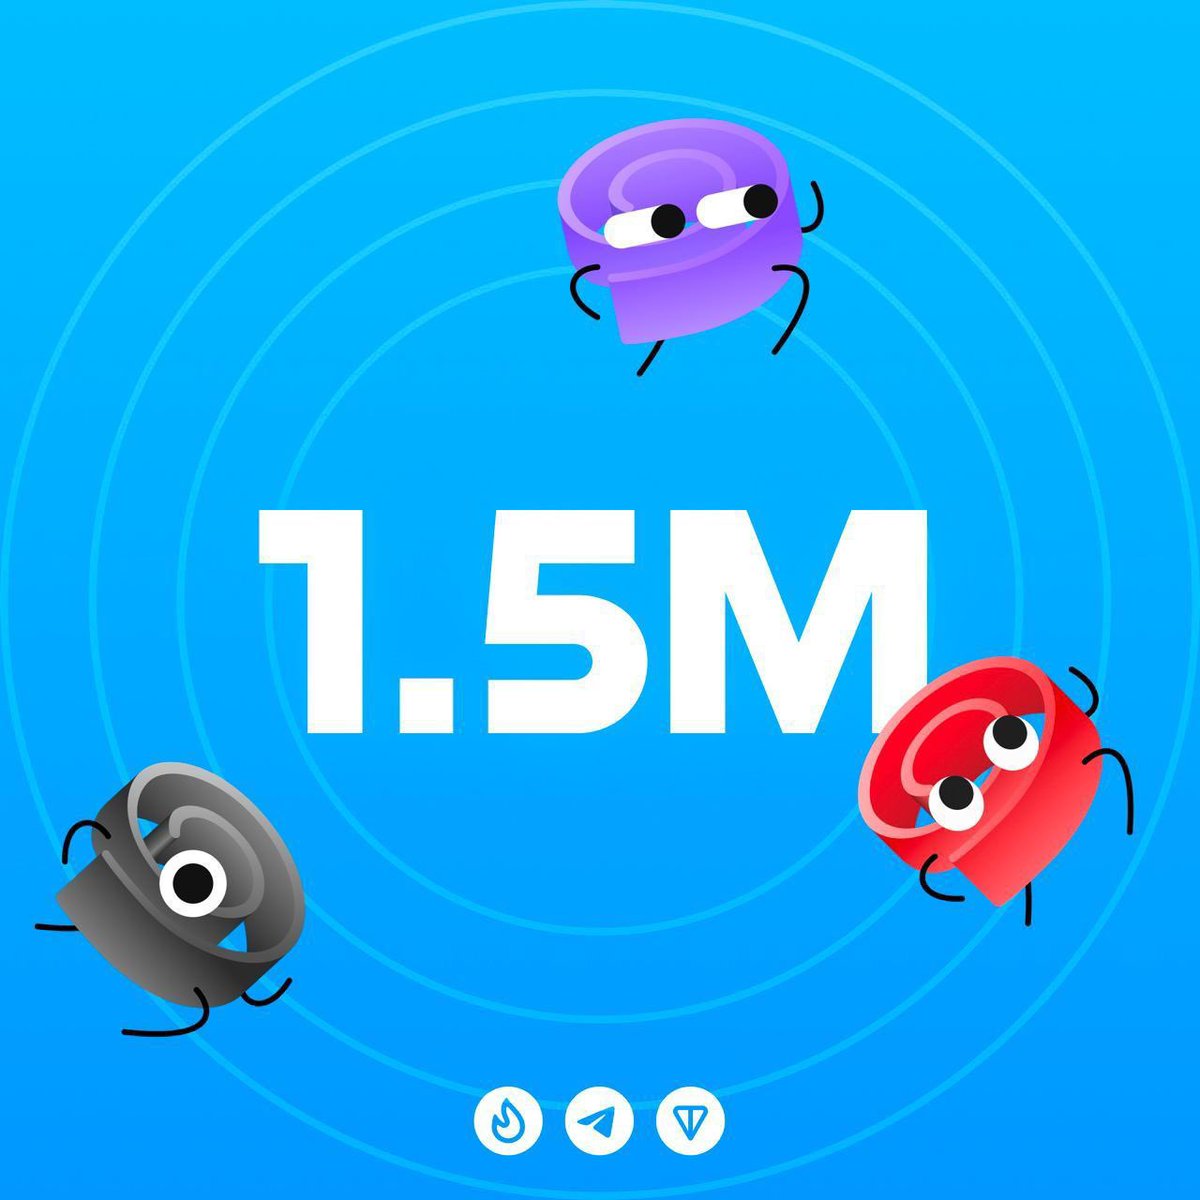 t.me/fanzeebattlesb… audience 1 March 👀 500K users 21 March 😈 1.5M users +1M in 20 days. boom. $FNZ price 1 March 👀 $0.005 21 March 😈 $0.015 x3 in 20 days. moon.